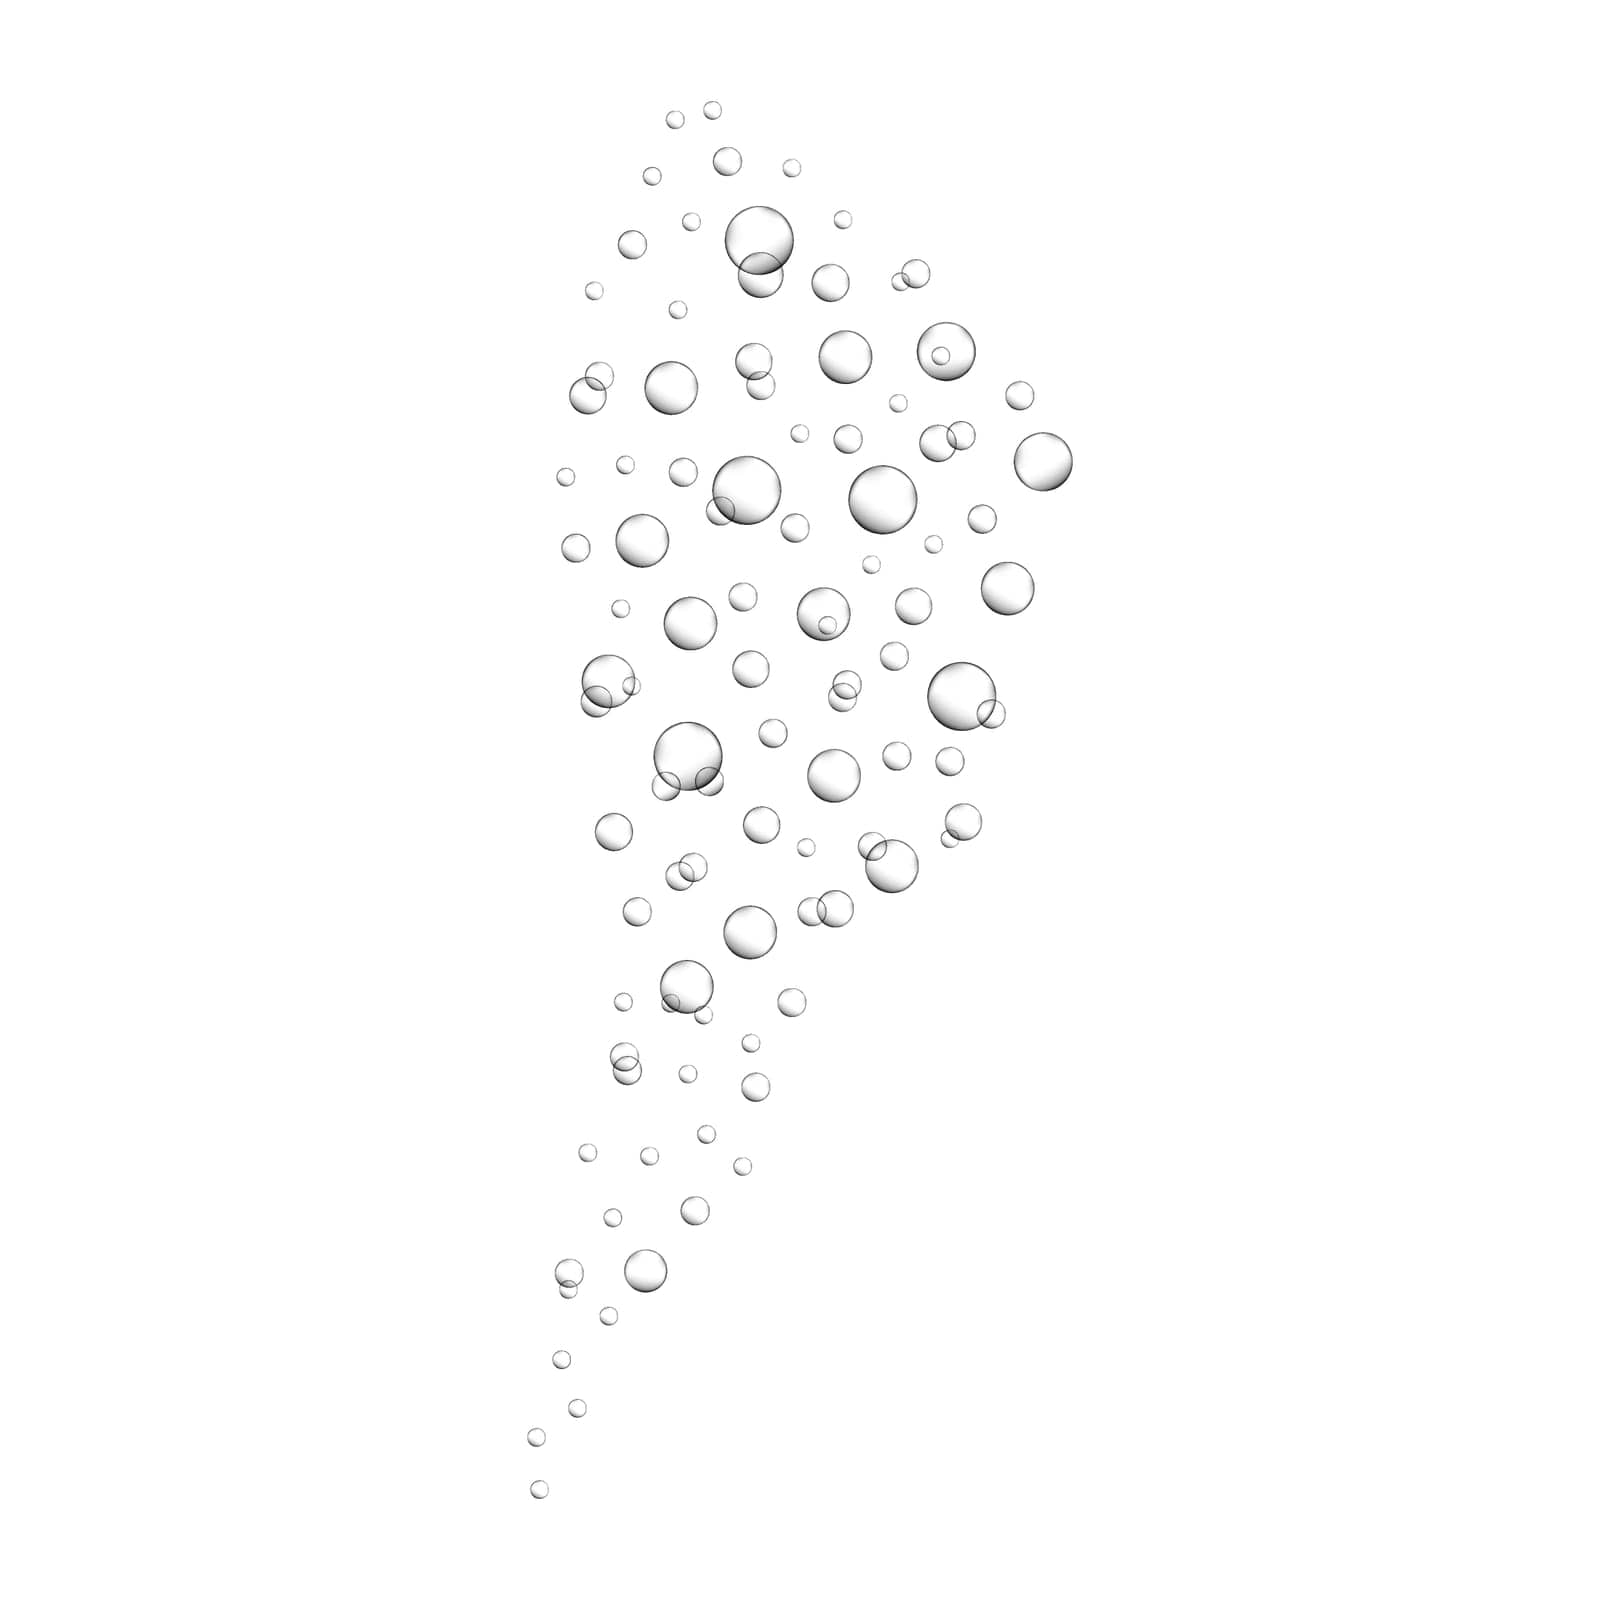 Water air bubbles isolated on white background. Oxygen bubbles in ocean, sea or aquarium. Fizzy drink, soda, lemonade, champagne. Vector realistic illustration.